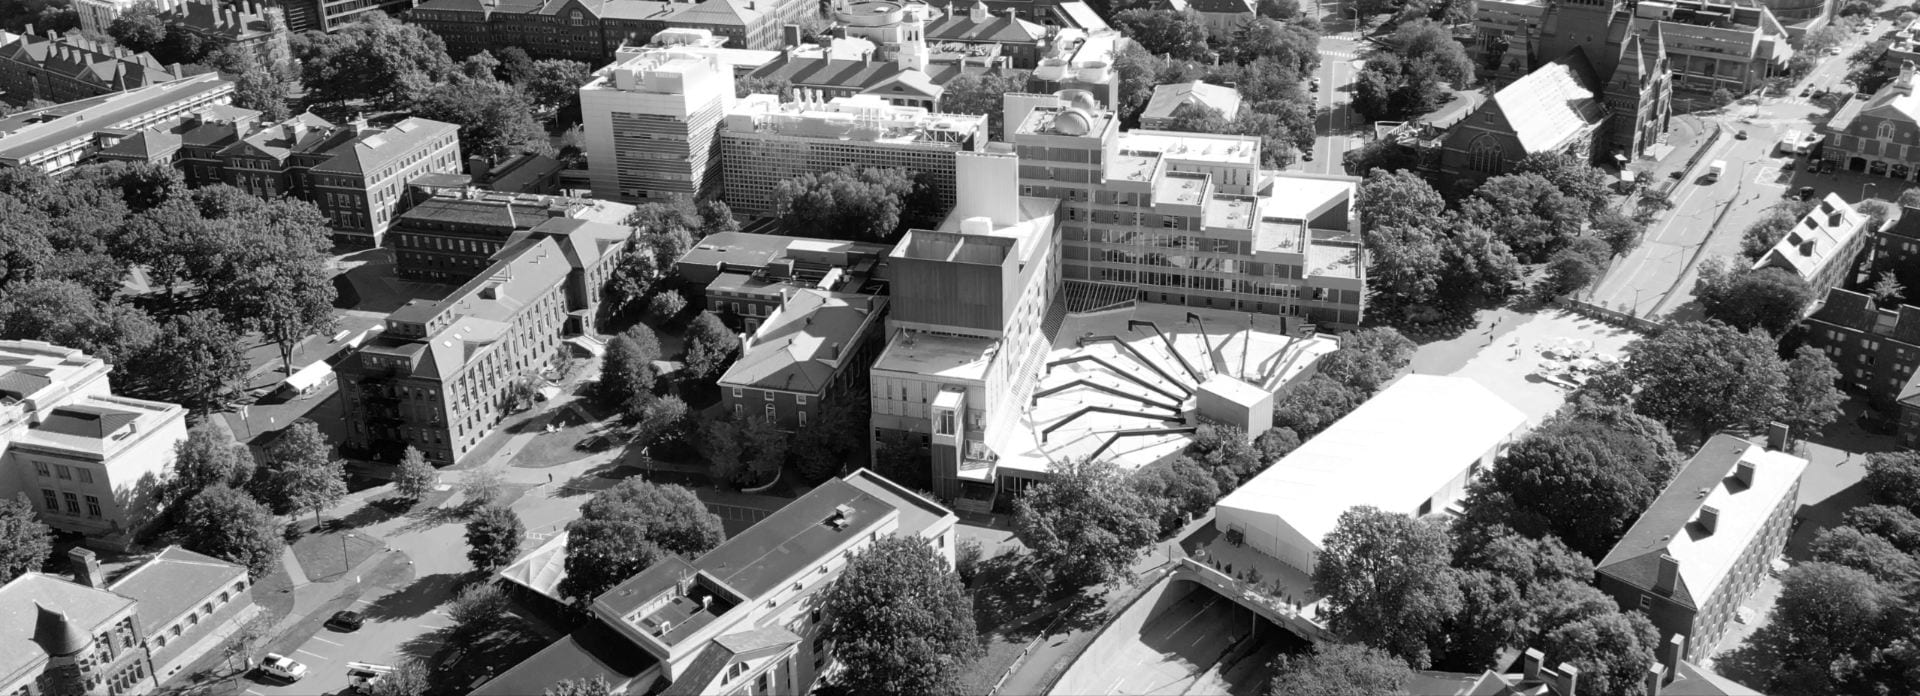 A black and white aerial view of the Harvard University Cambridge campus with a focus on the Science Center building.